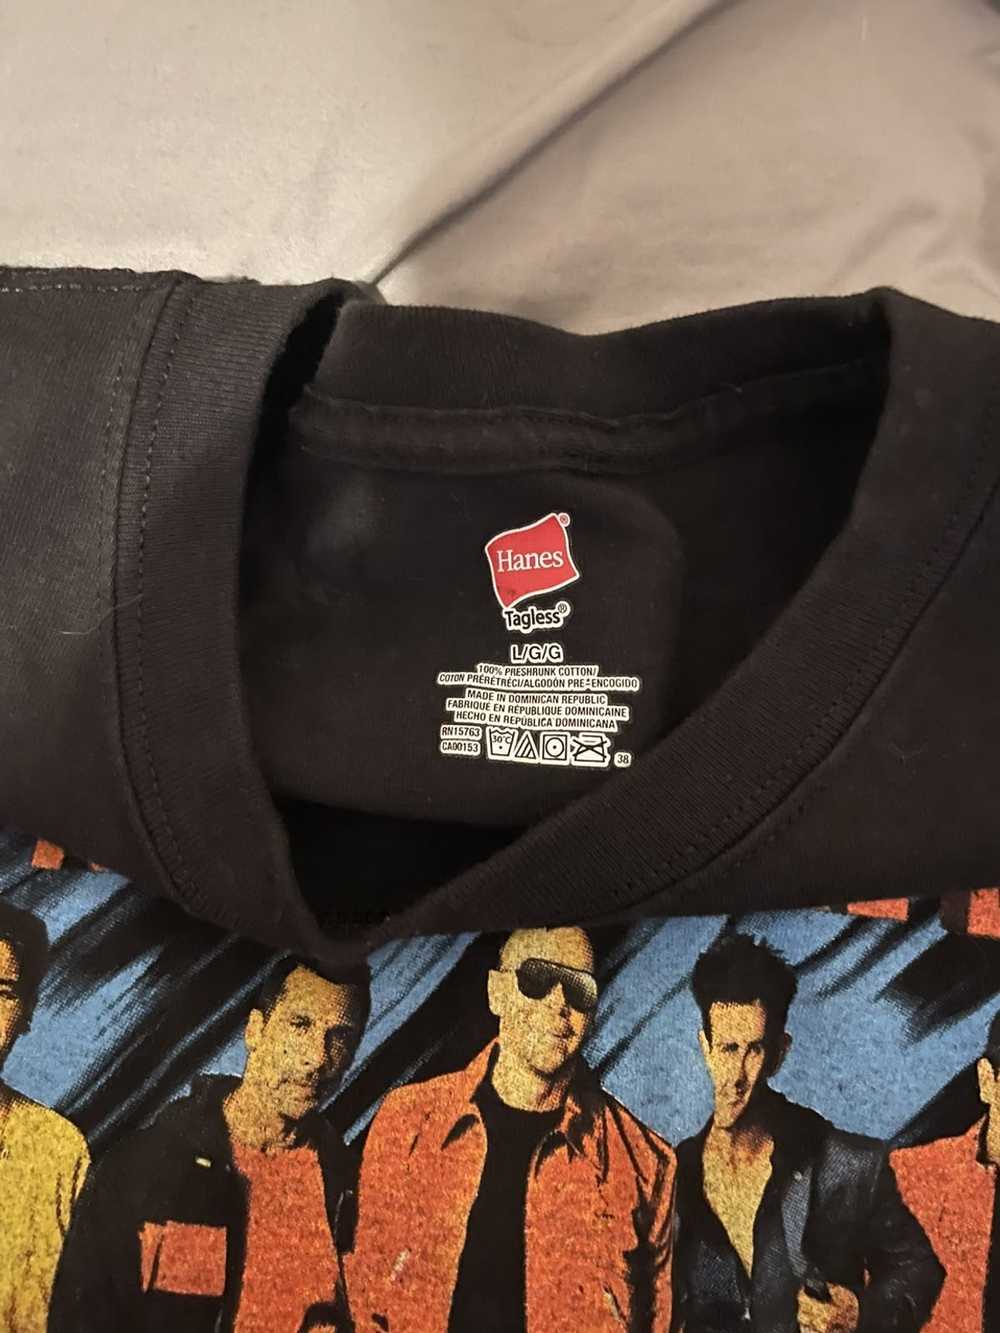 Band Tees new kids on the block tee - image 3